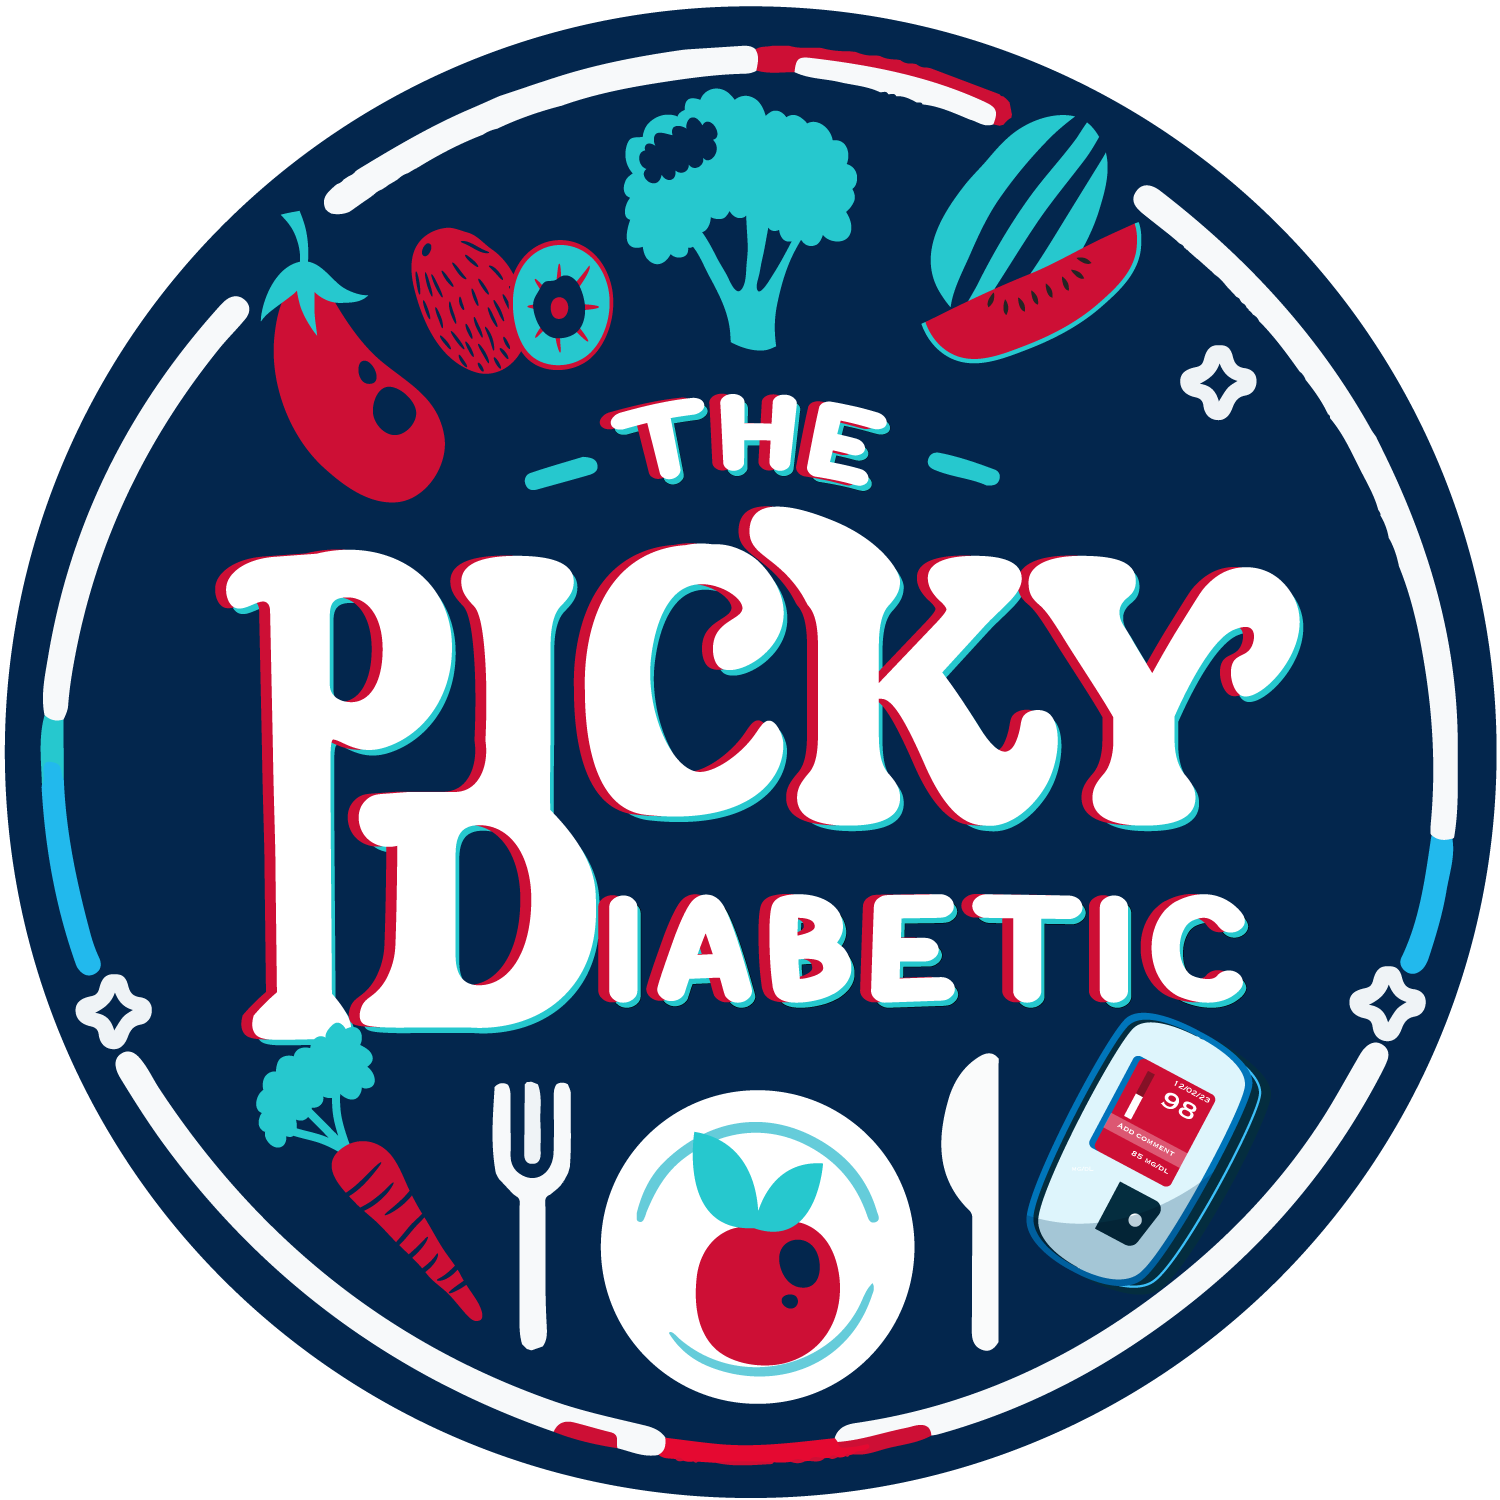 The Picky Diabetic